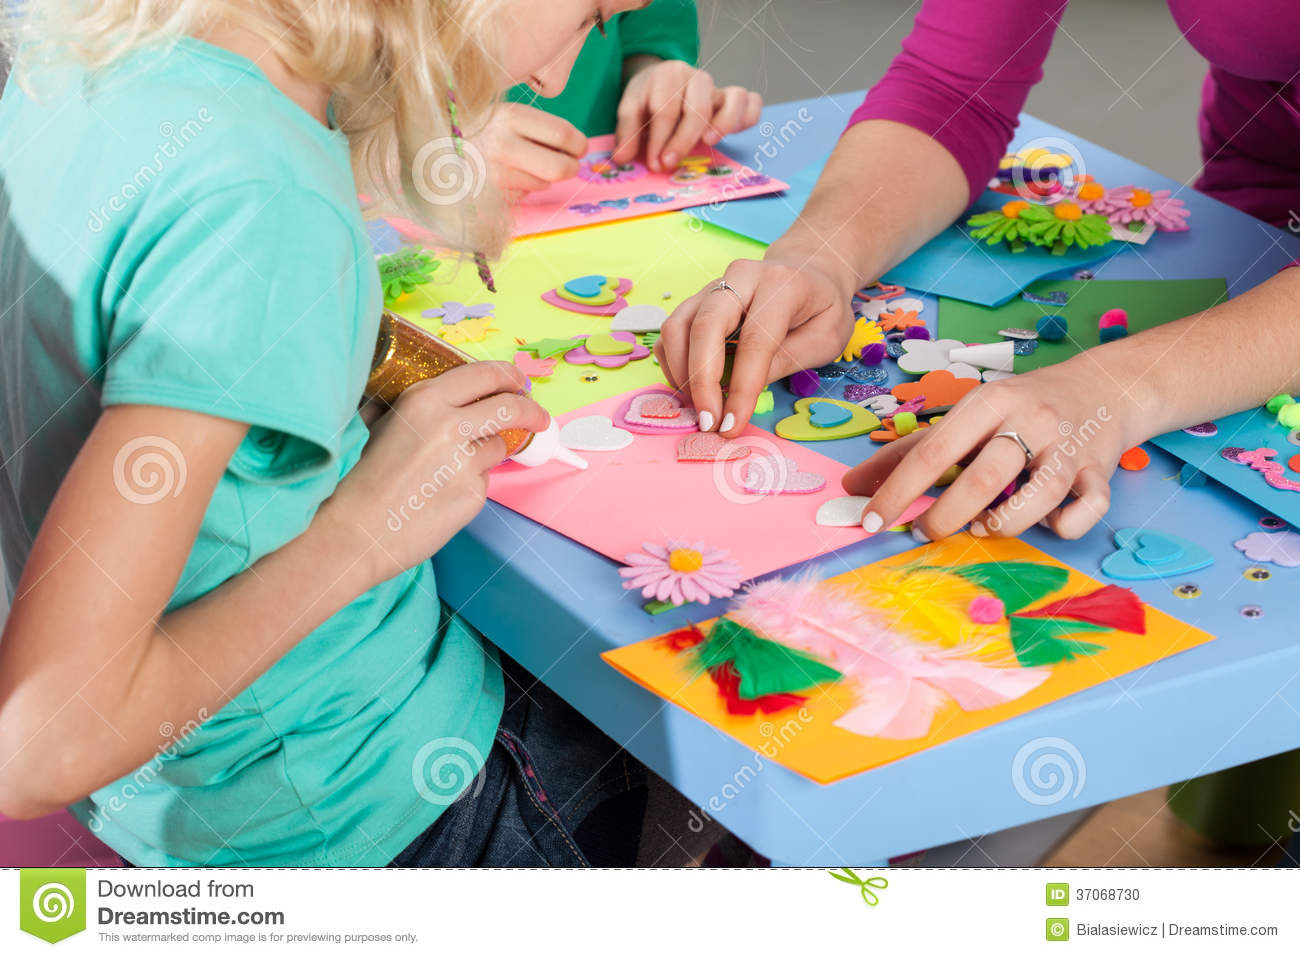 Best ideas about Kids Making Art
. Save or Pin Children Making Decorations Paper Stock Image Now.